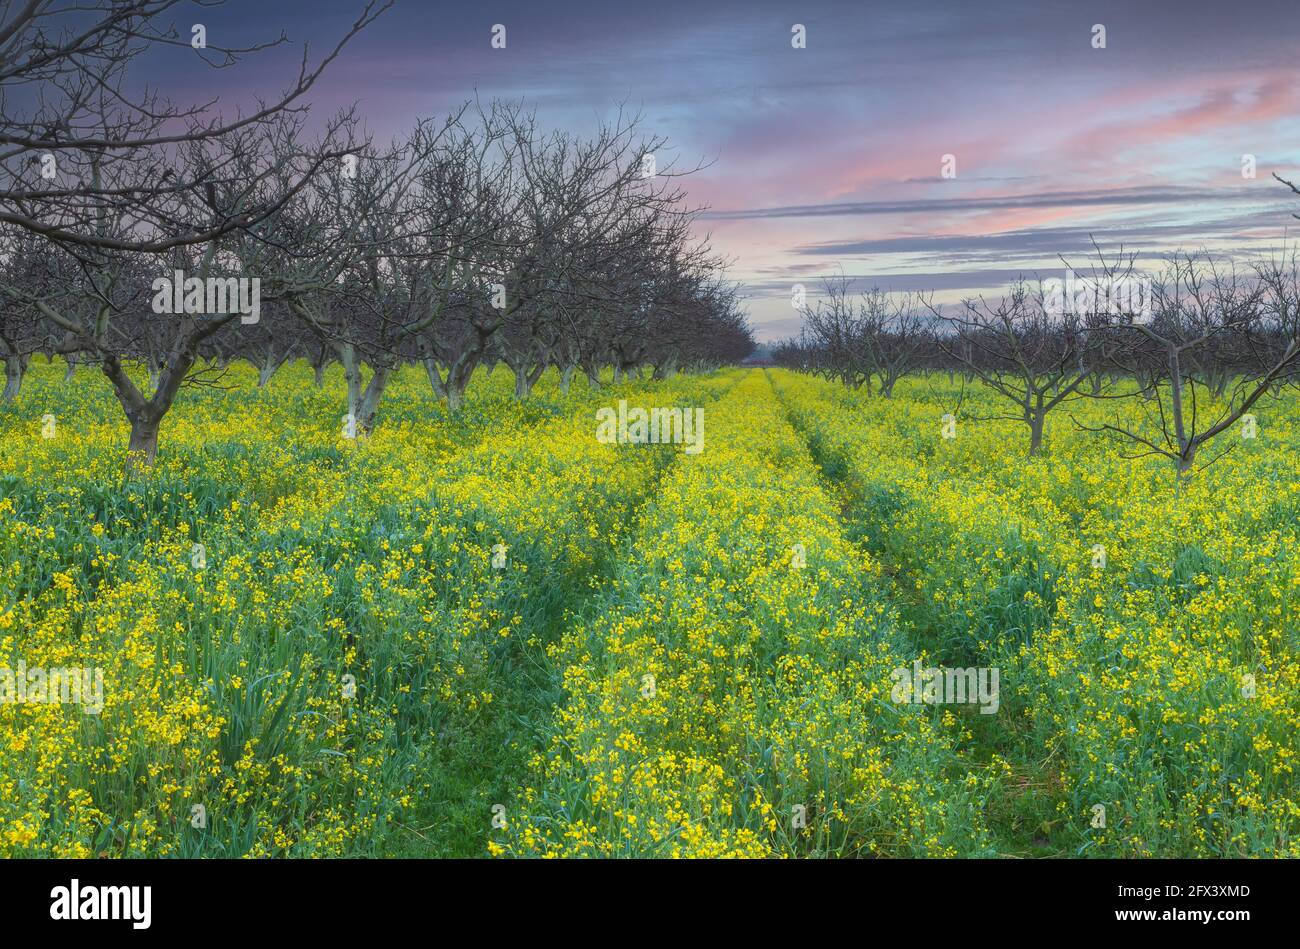 Blooming field mustard at the walnut farm in Gilroy, California, United States, in early spring morning. Stock Photo